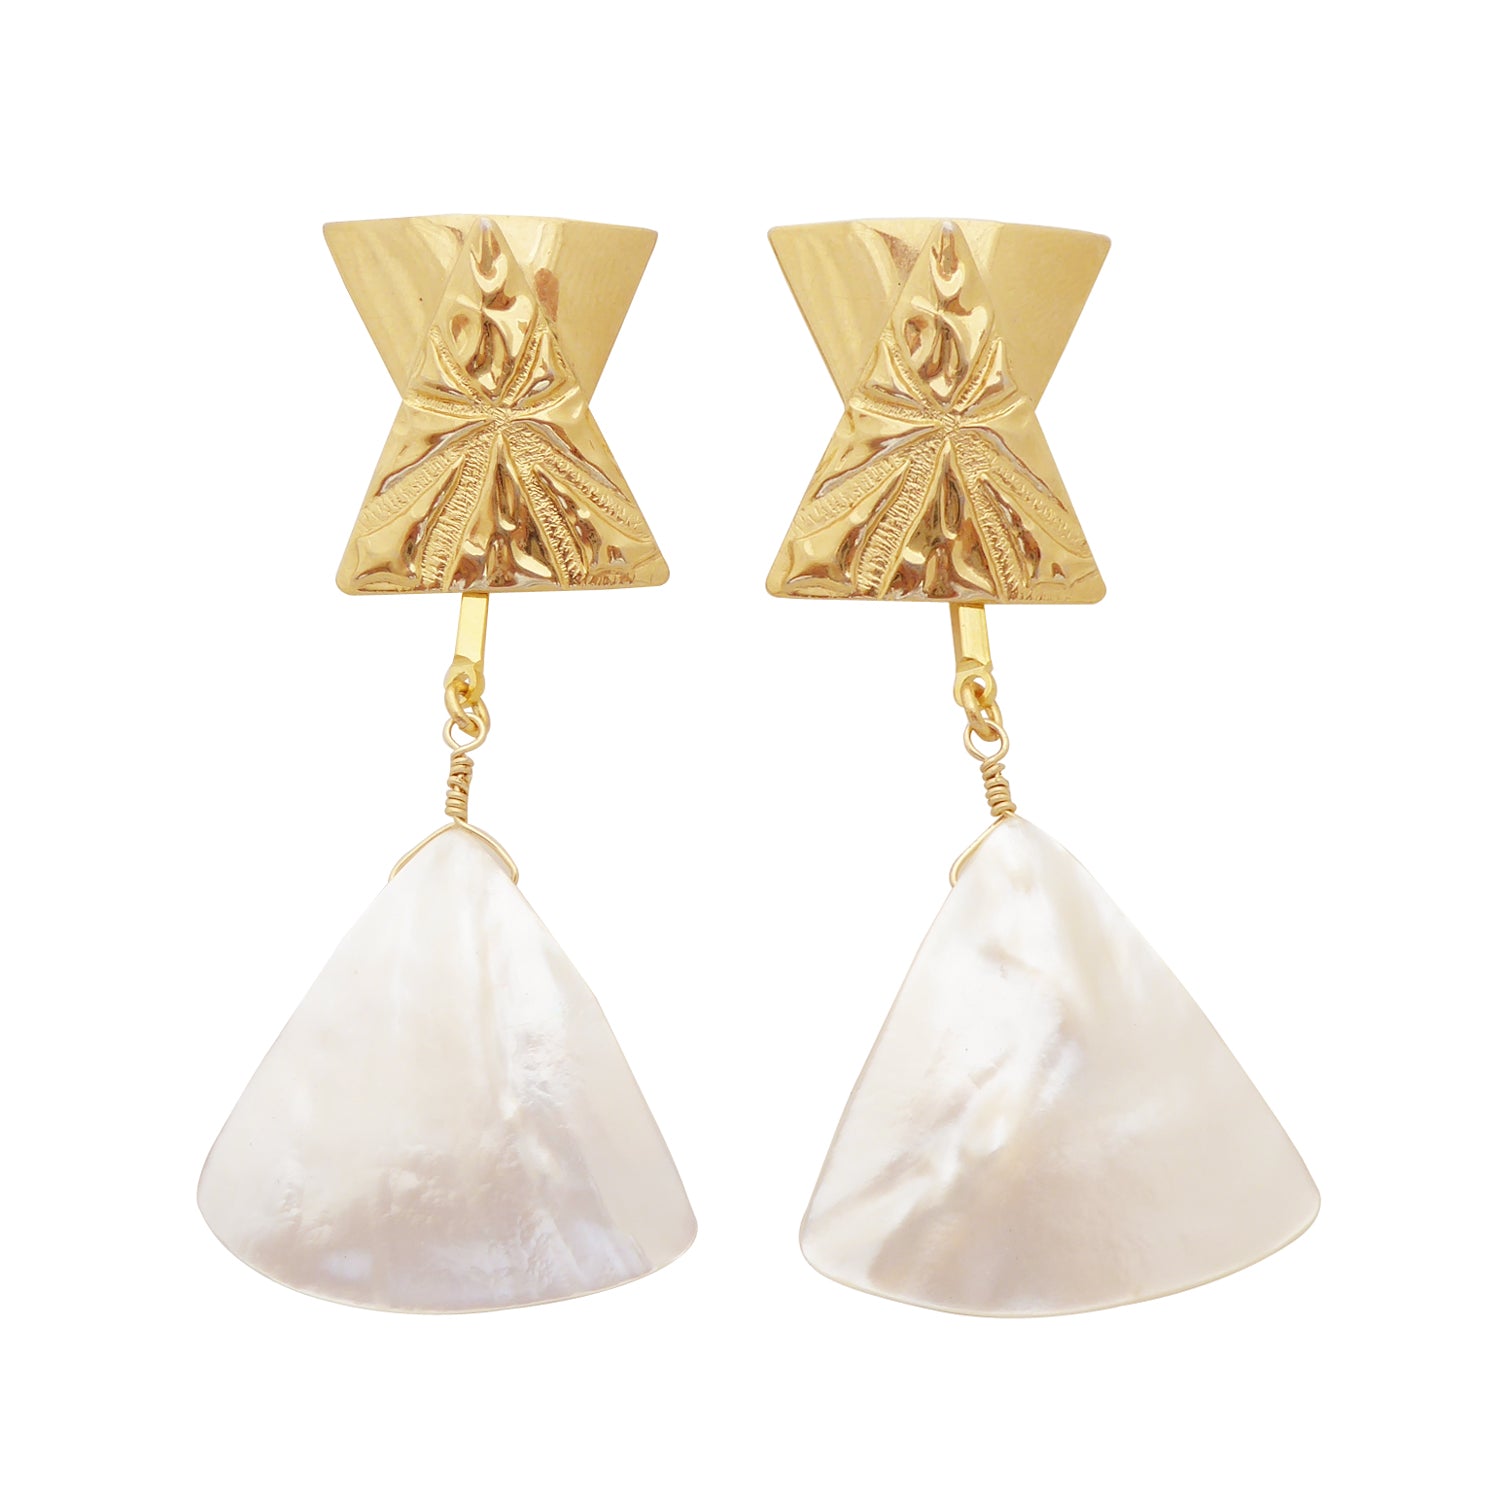 Triantan gold and white mother of pearl triangle earrings by Jenny Dayco 1